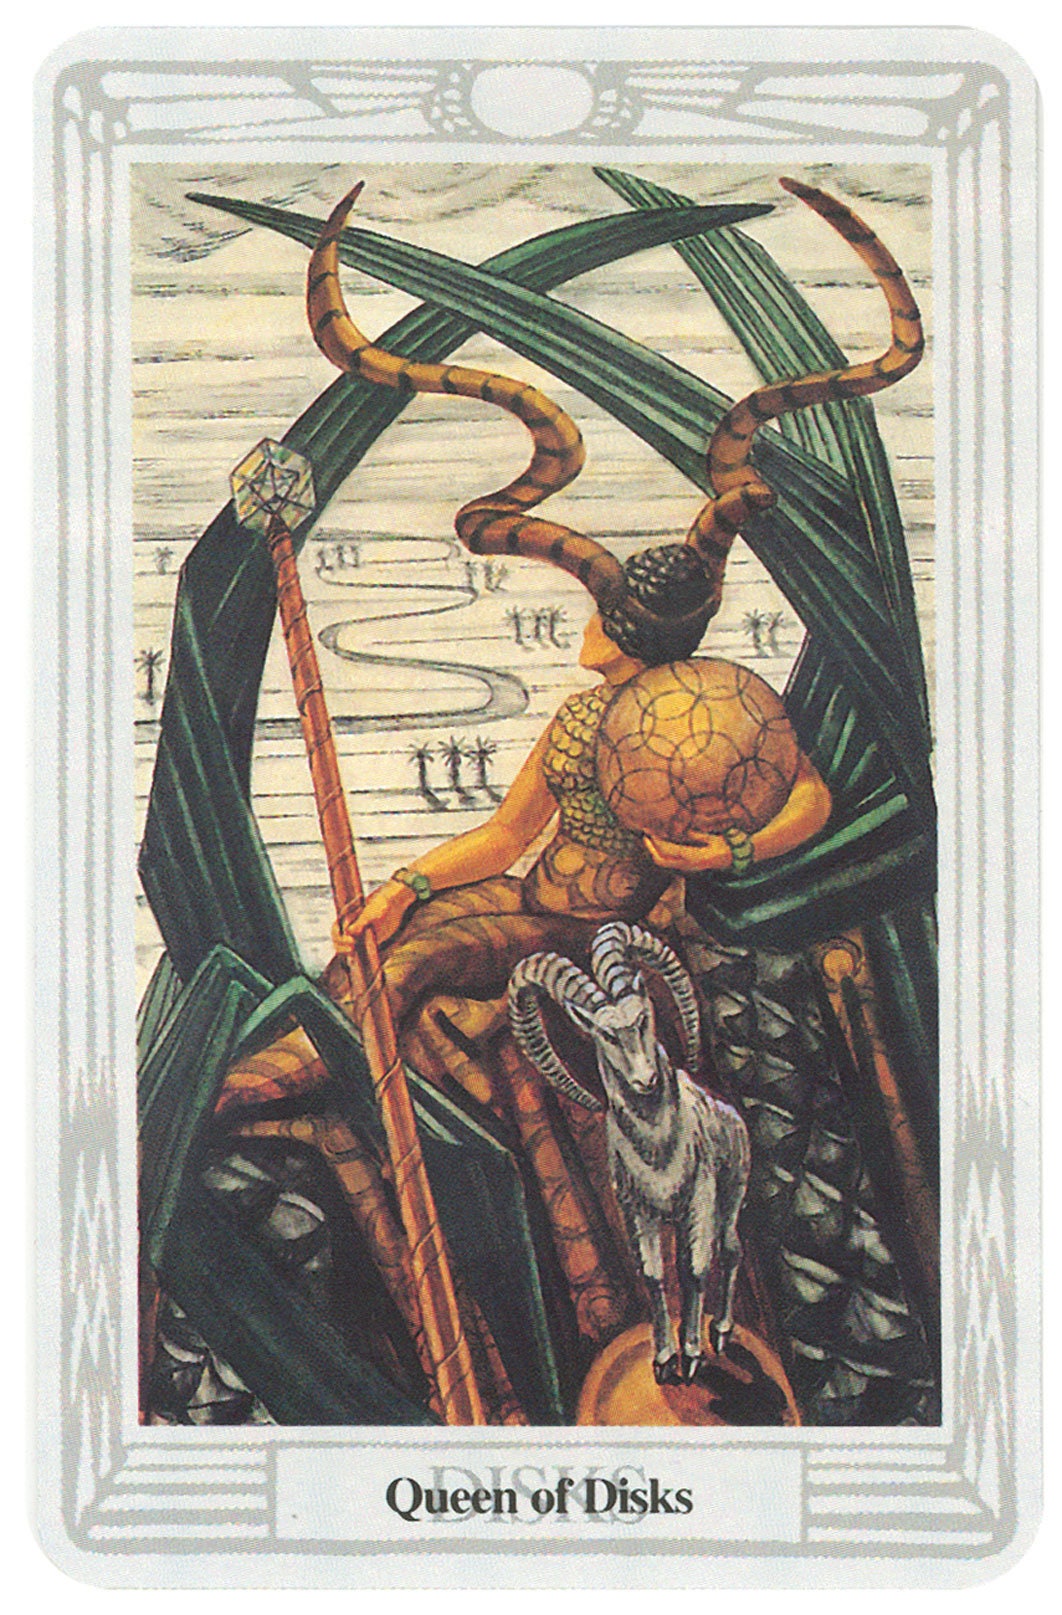 Aleister Crowley Thoth Tarot Deck — Premier Edition